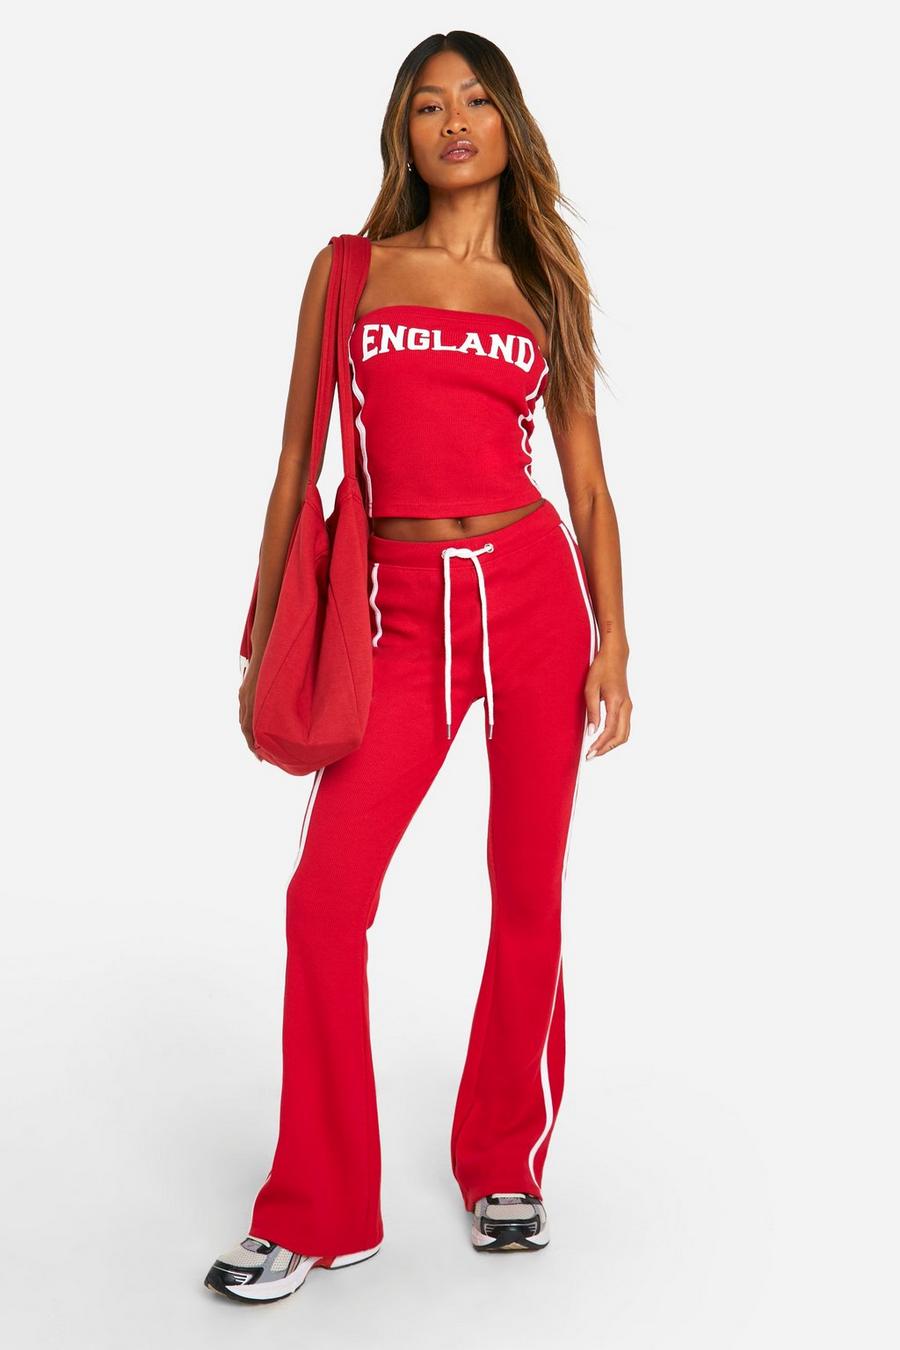 Red England Slogan Bandeau Top And Trouser Set